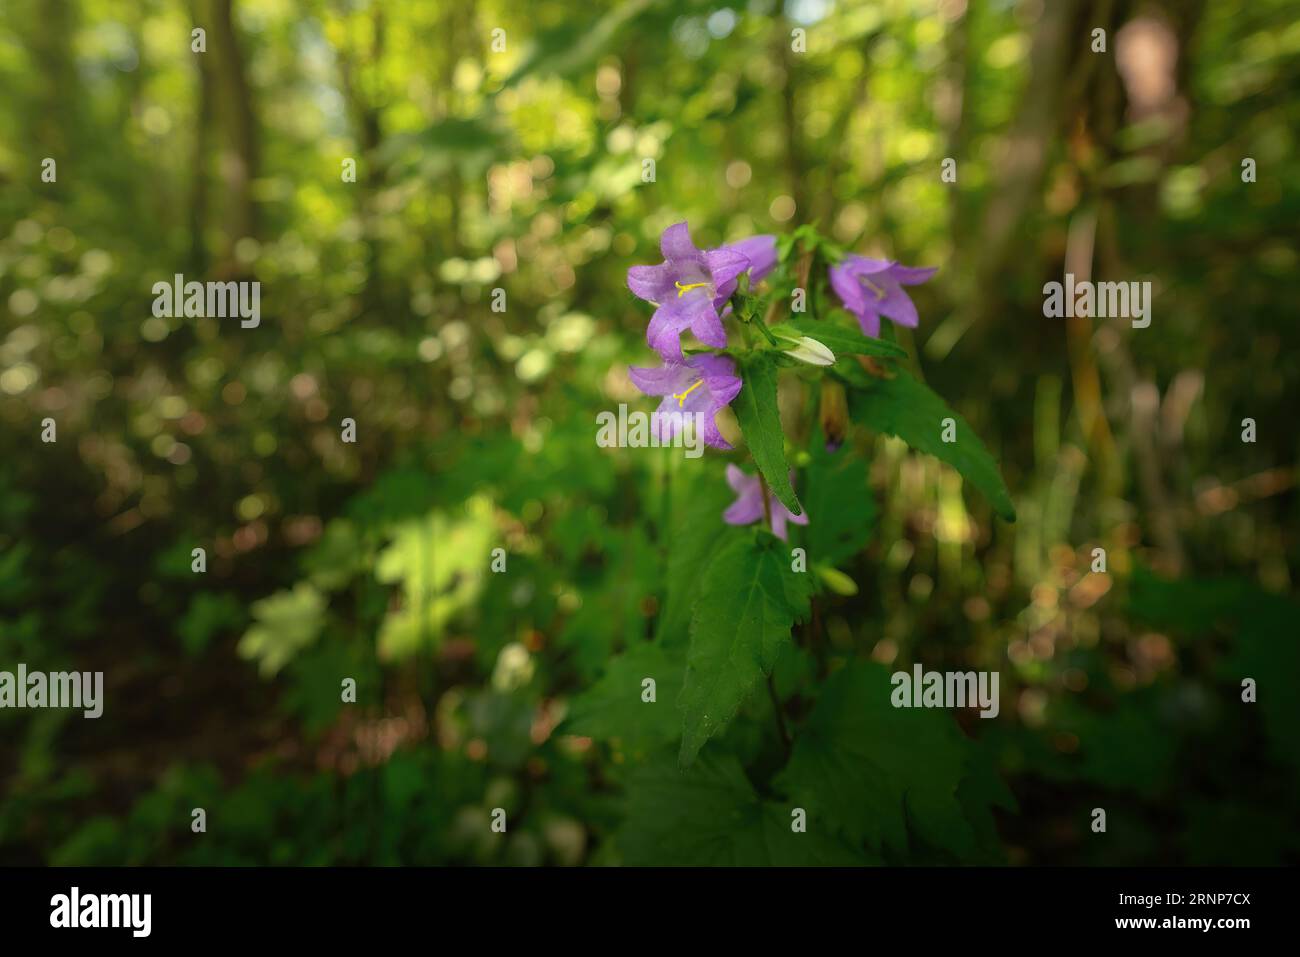 Beautiful Purple Bellflowers (Campanula) in a forest Stock Photo